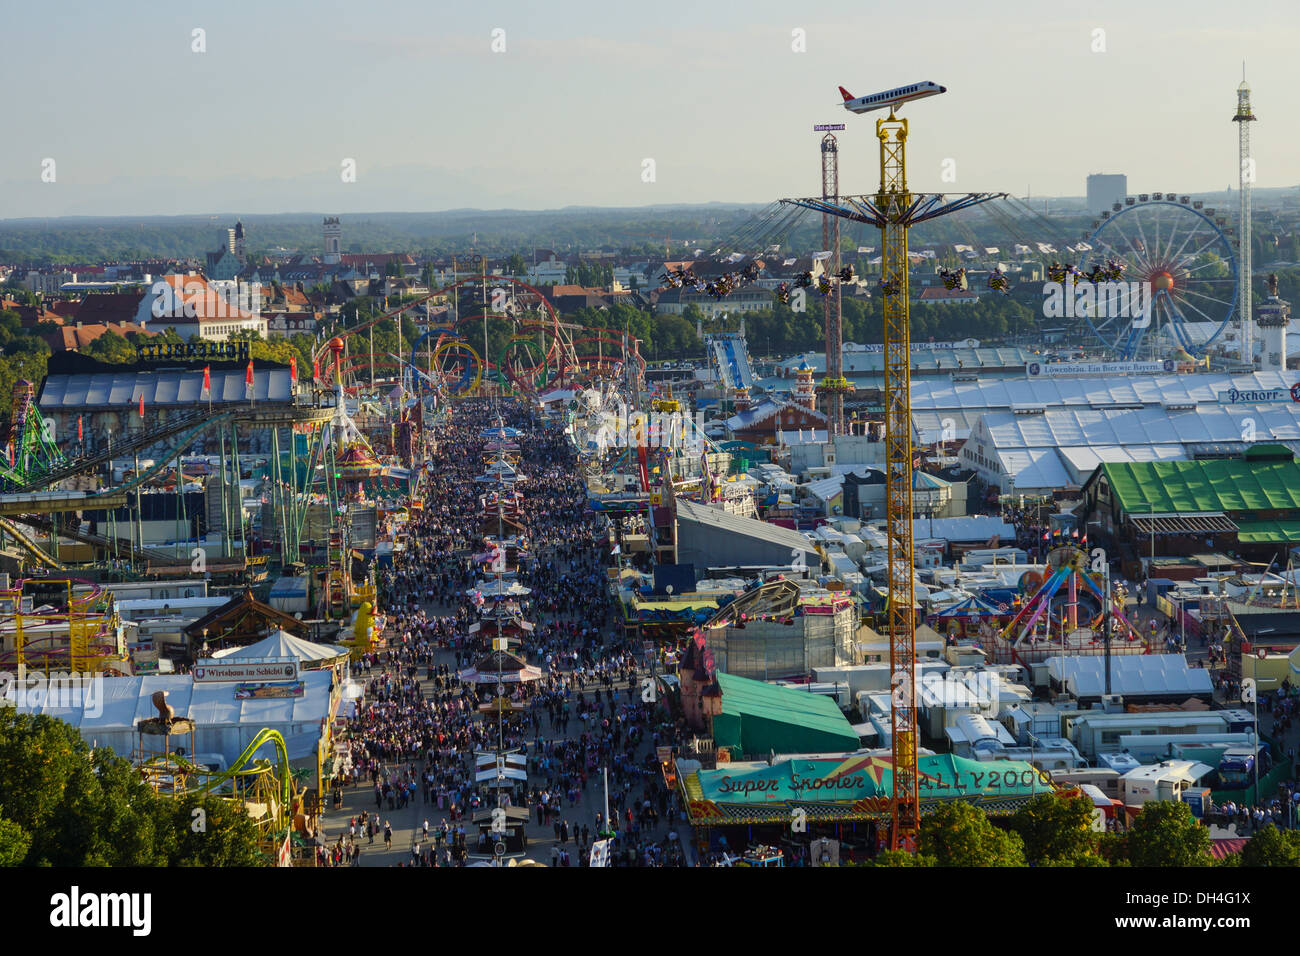 Look at the Wiesn, Munich Oktoberfes Beer Festival, Bavaria, Germany Stock Photo